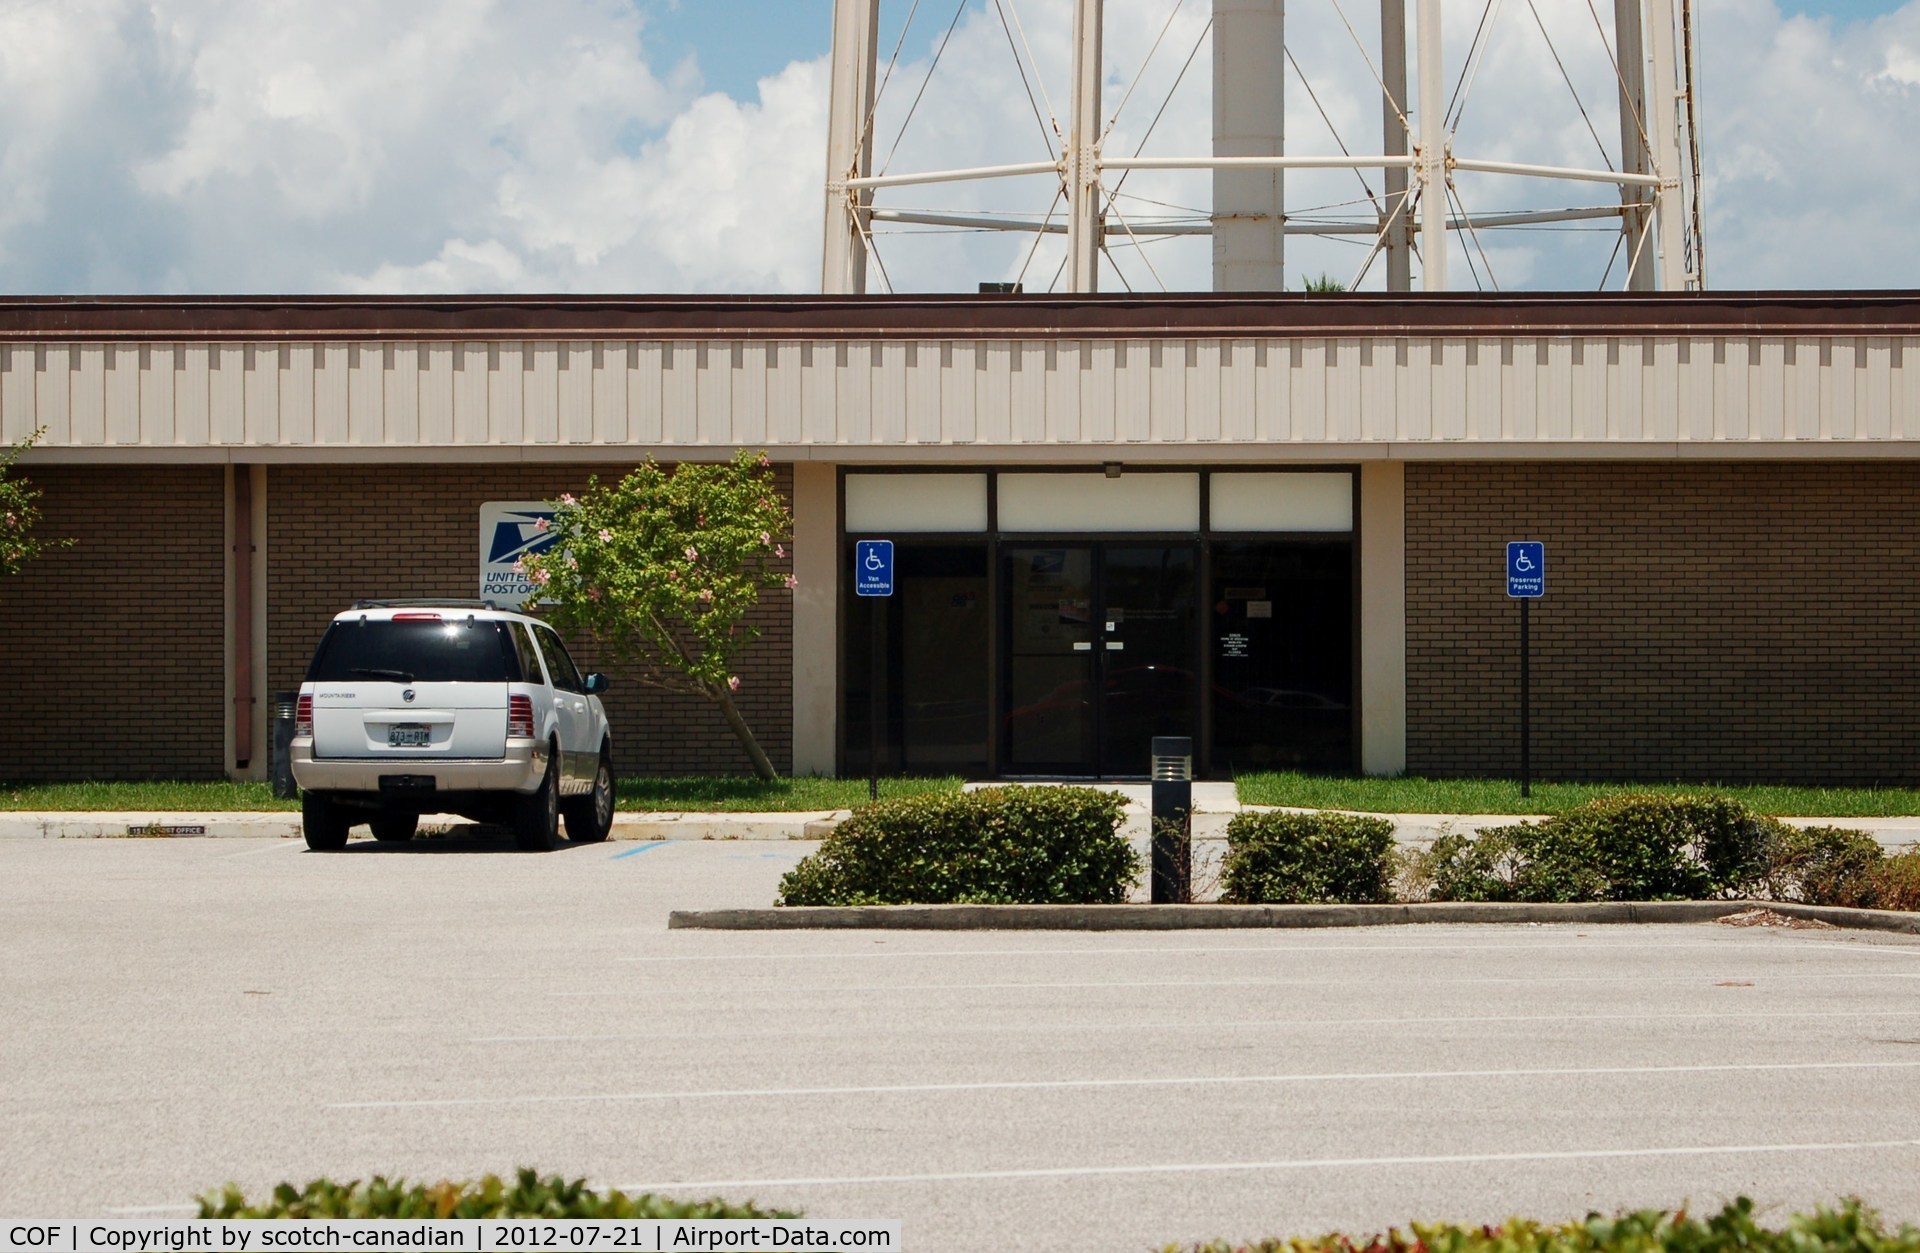 Patrick Afb Airport (COF) - United States Post Office at Patrick Air Force Base, FL